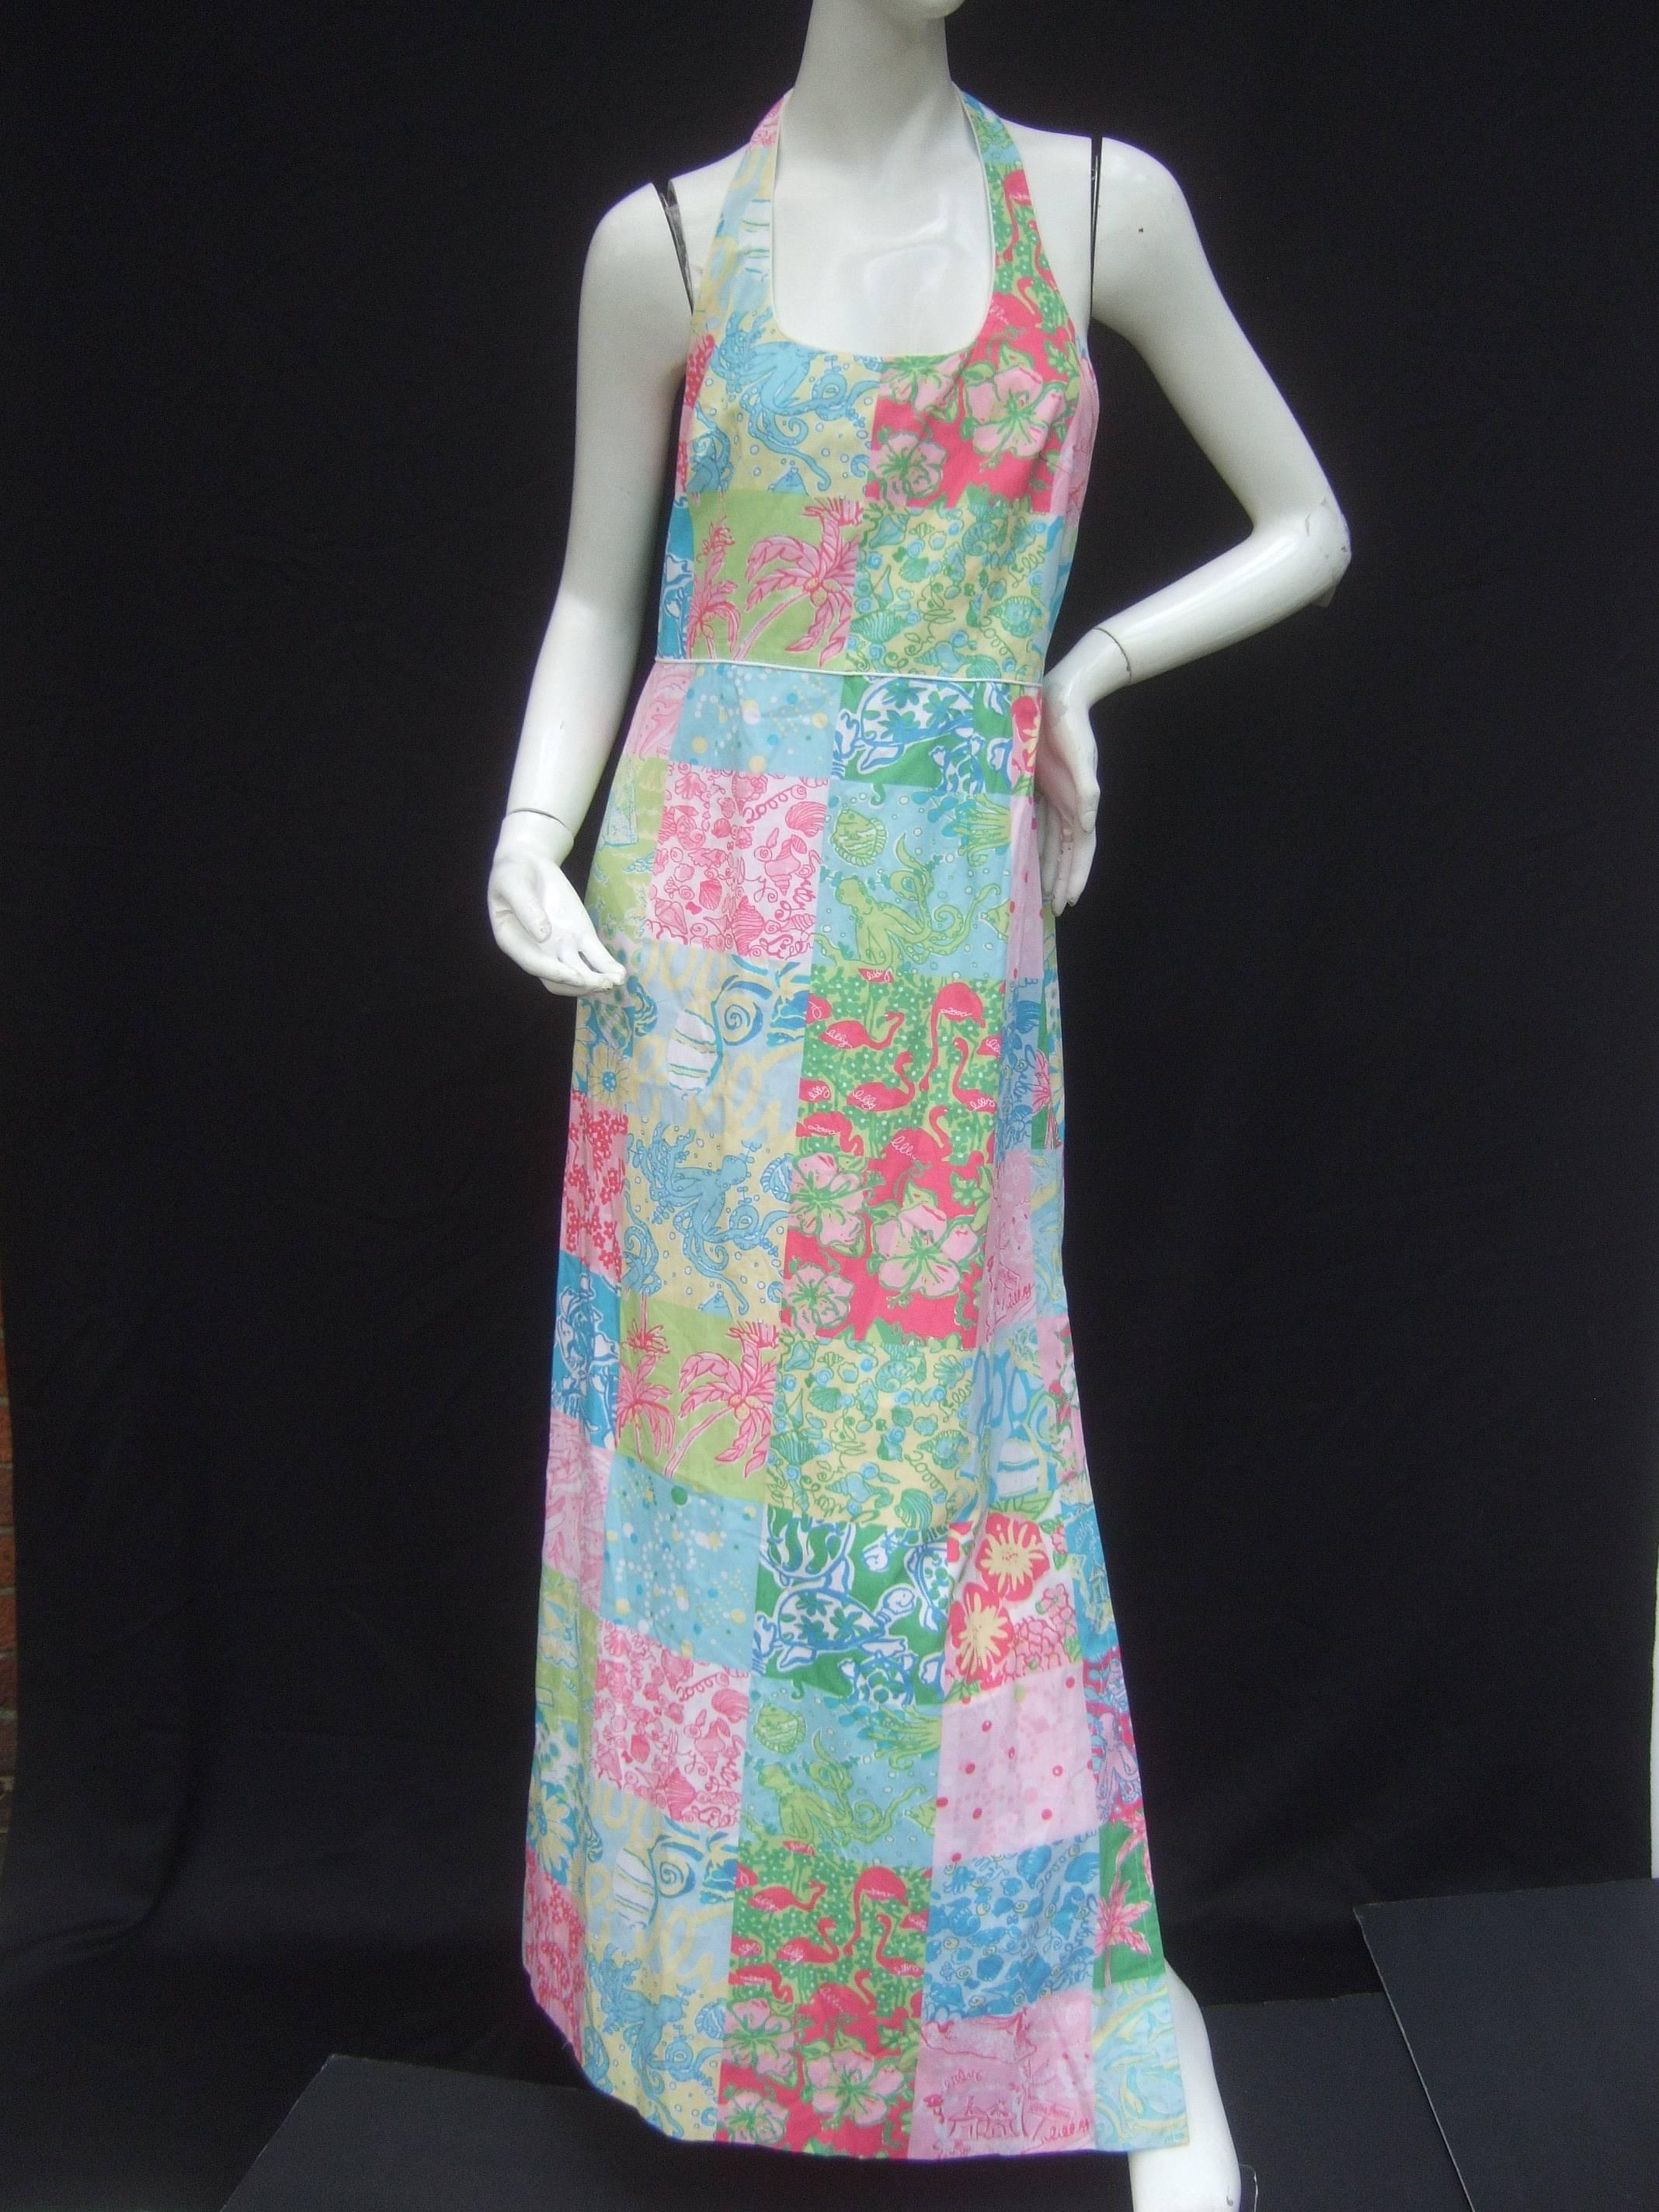 Lilly Pulitzer vibrant sea life cotton print gown
The crisp cotton halter gown is deigned with 
a series of bold sea life and floral graphics
in a square patch work style design

The collection of sea creatures, sea shells
and flowers have